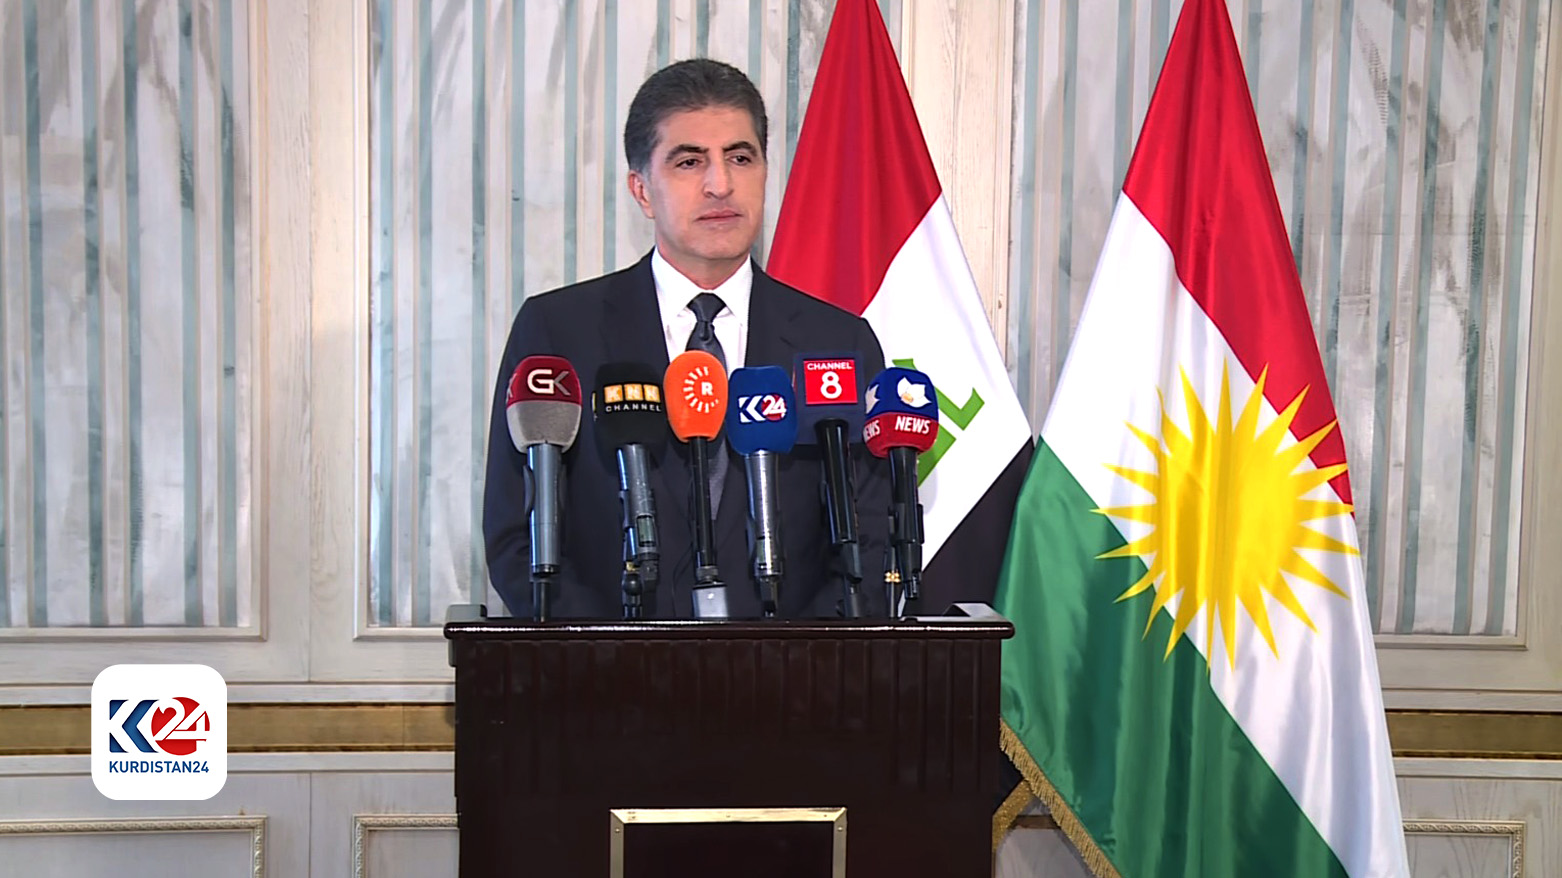 KRG President Barzani optimistic about Iran visit foresees enhanced relations